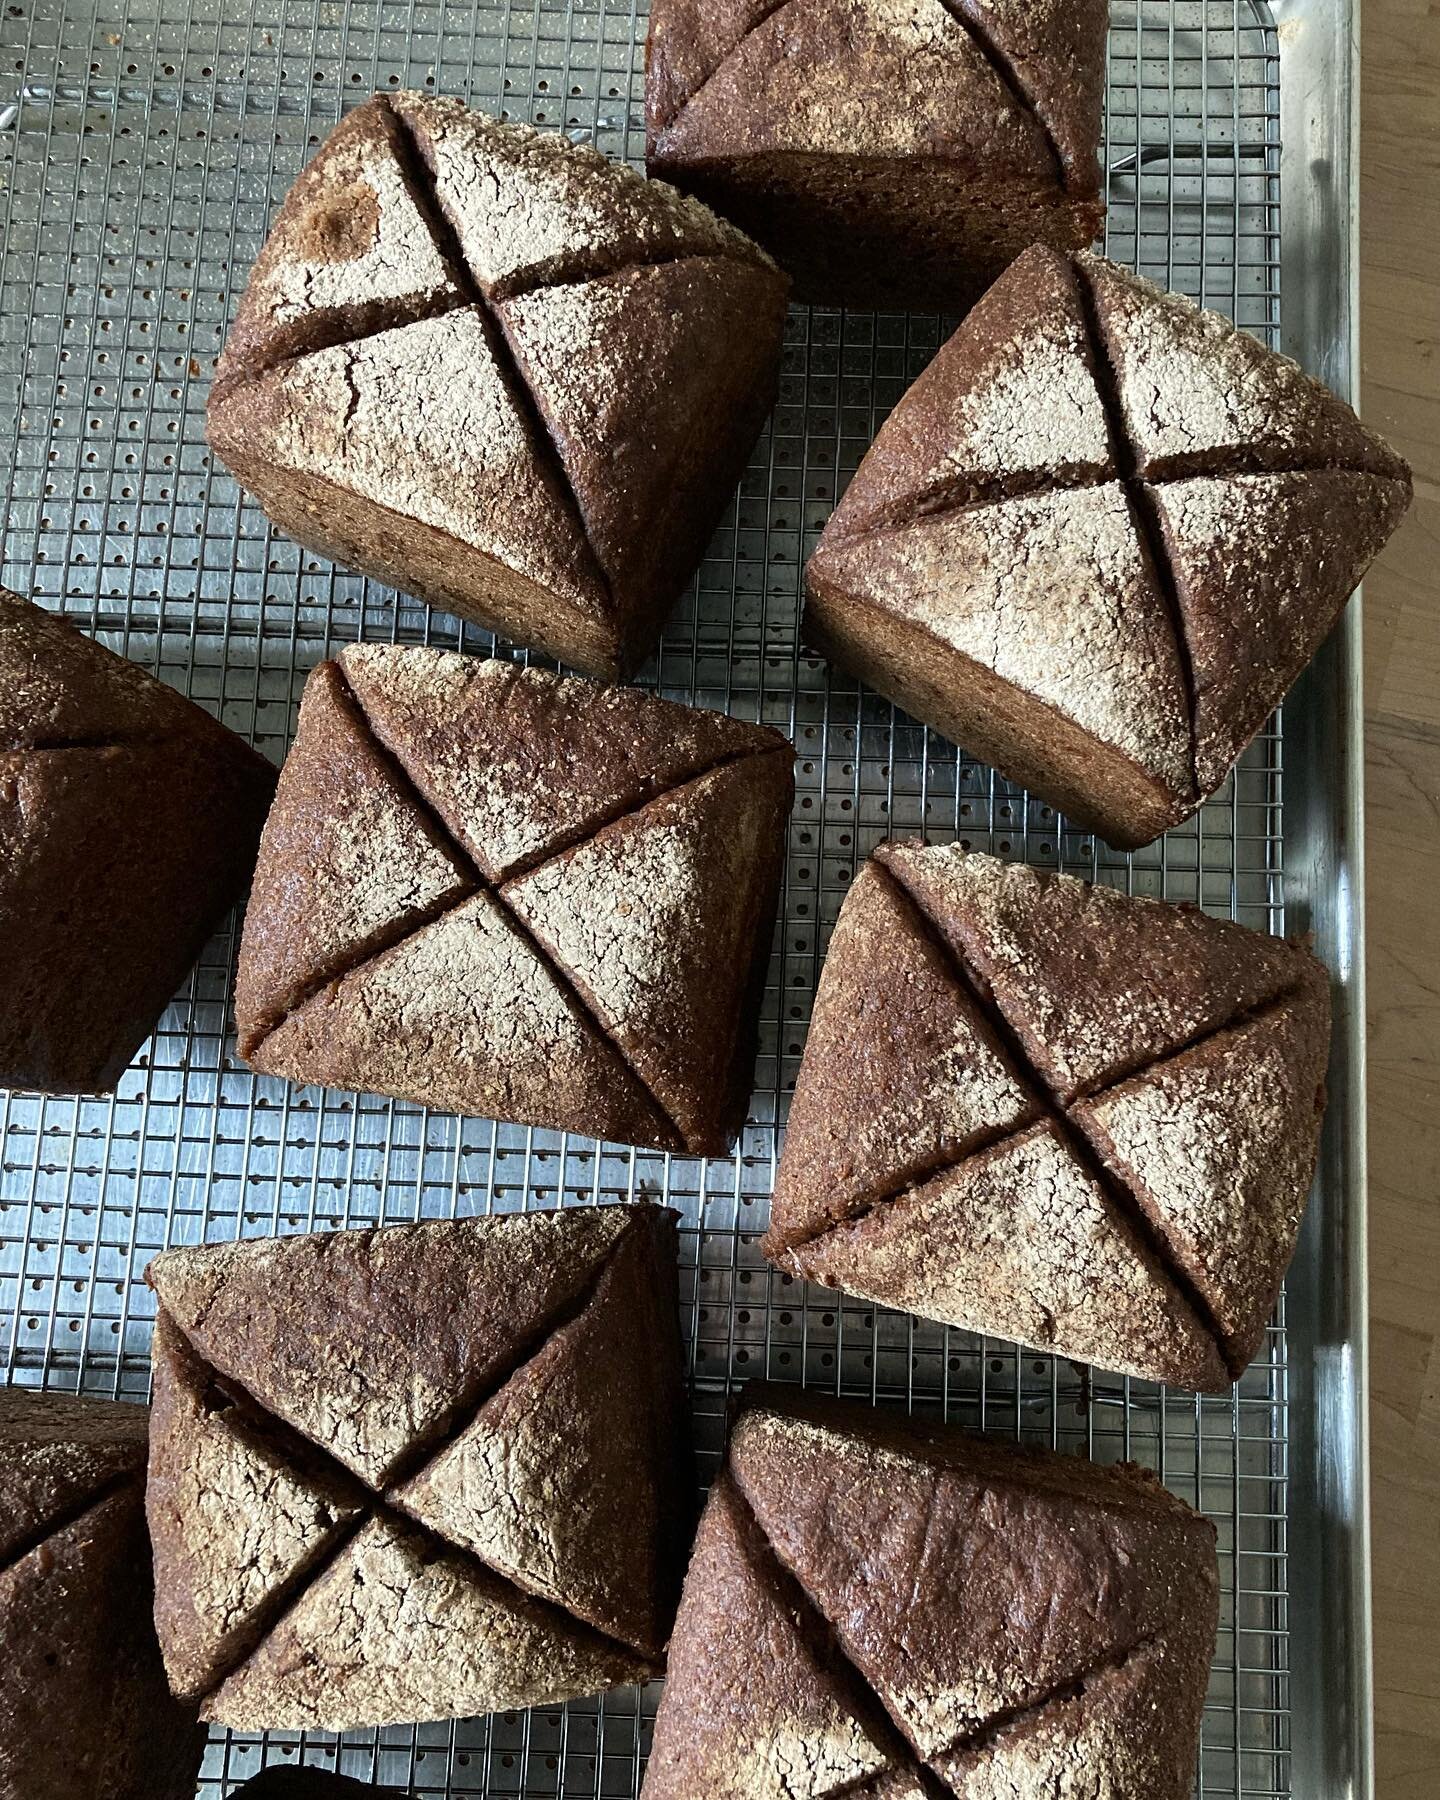 These #pumpernickel beauties are resting up for tomorrow&rsquo;s PSU Market starting at 9am! We&rsquo;ve got crackers, we&rsquo;ve got crisps, we&rsquo;ve got granola and for bread, we&rsquo;ll have: 🌾Purple Karma Barley, 🌾Einkorn Pepita, 🌾Walnut 